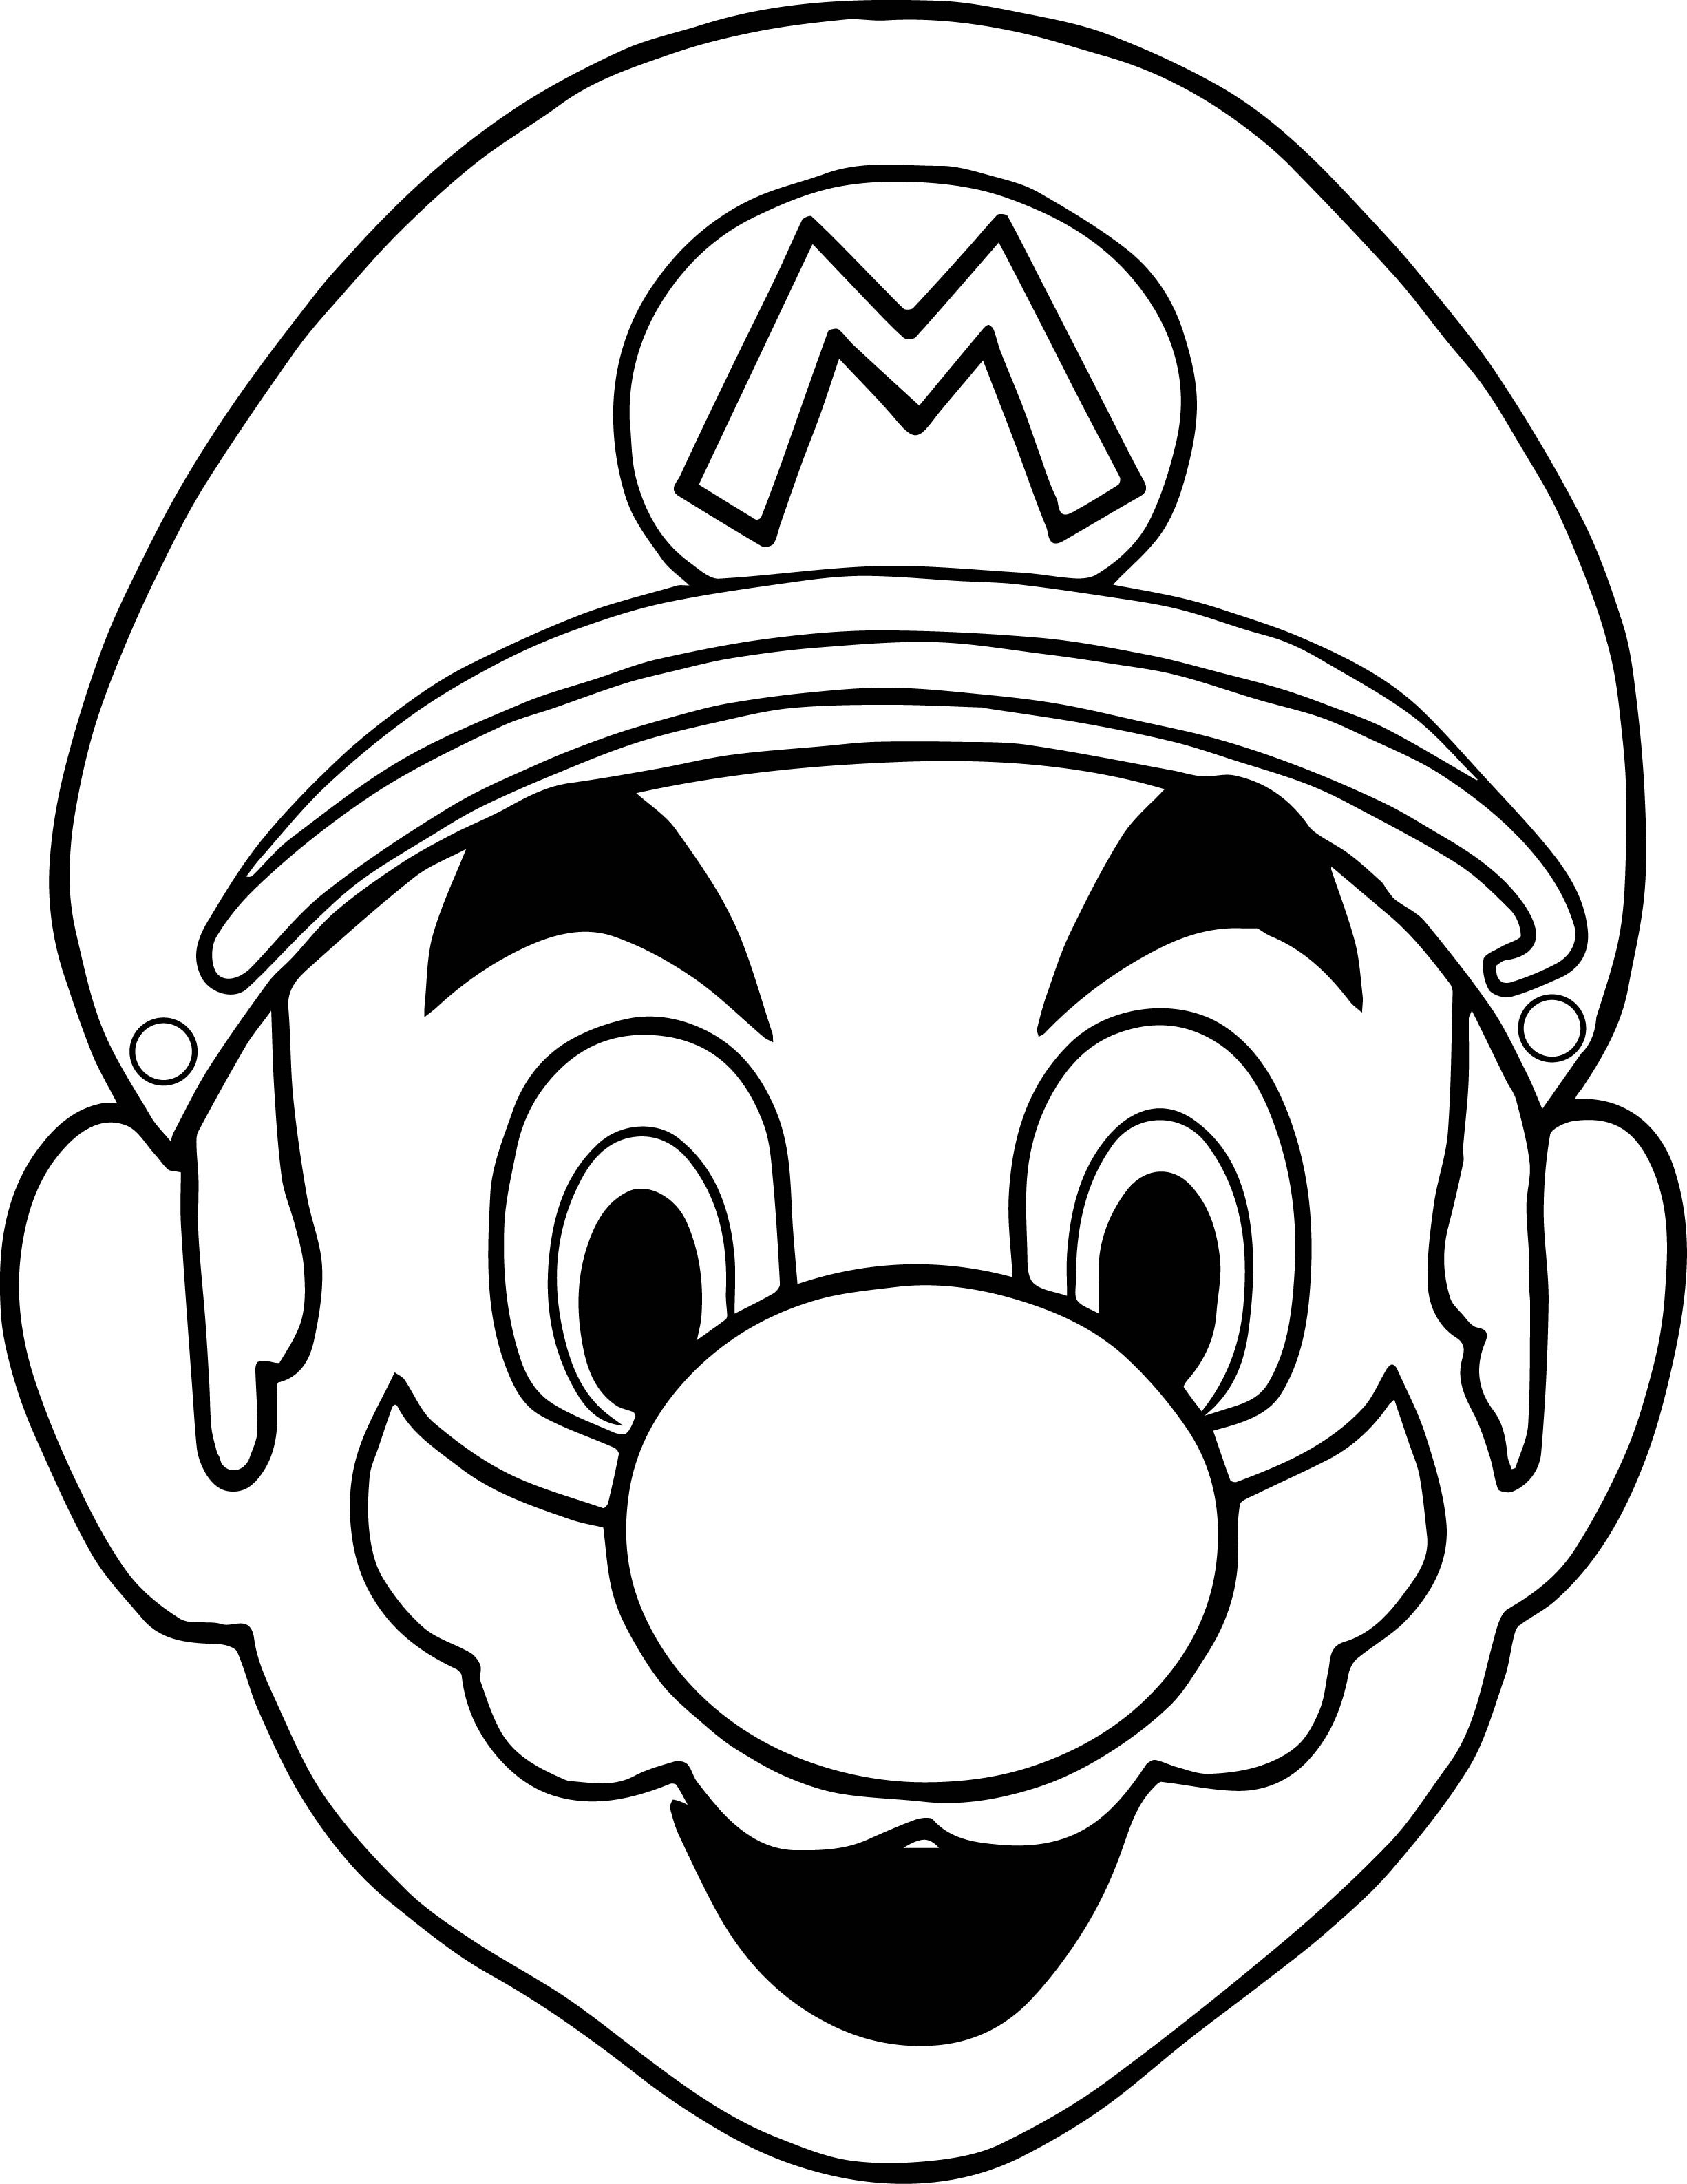 Mario Halloween Coloring Pages at GetColorings.com | Free printable